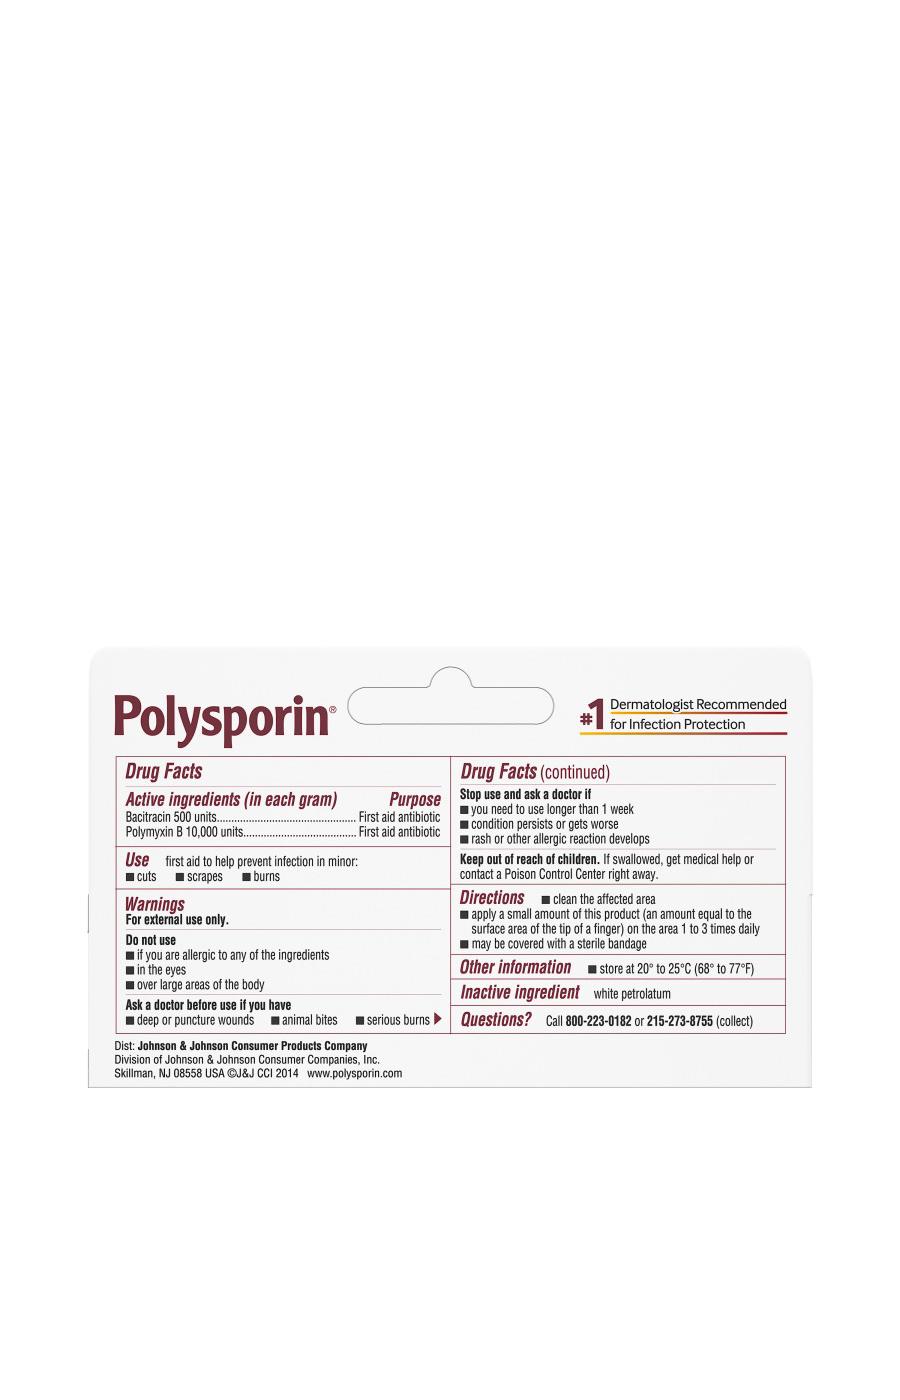 Polysporin First Aid Antibiotic Ointment; image 2 of 5